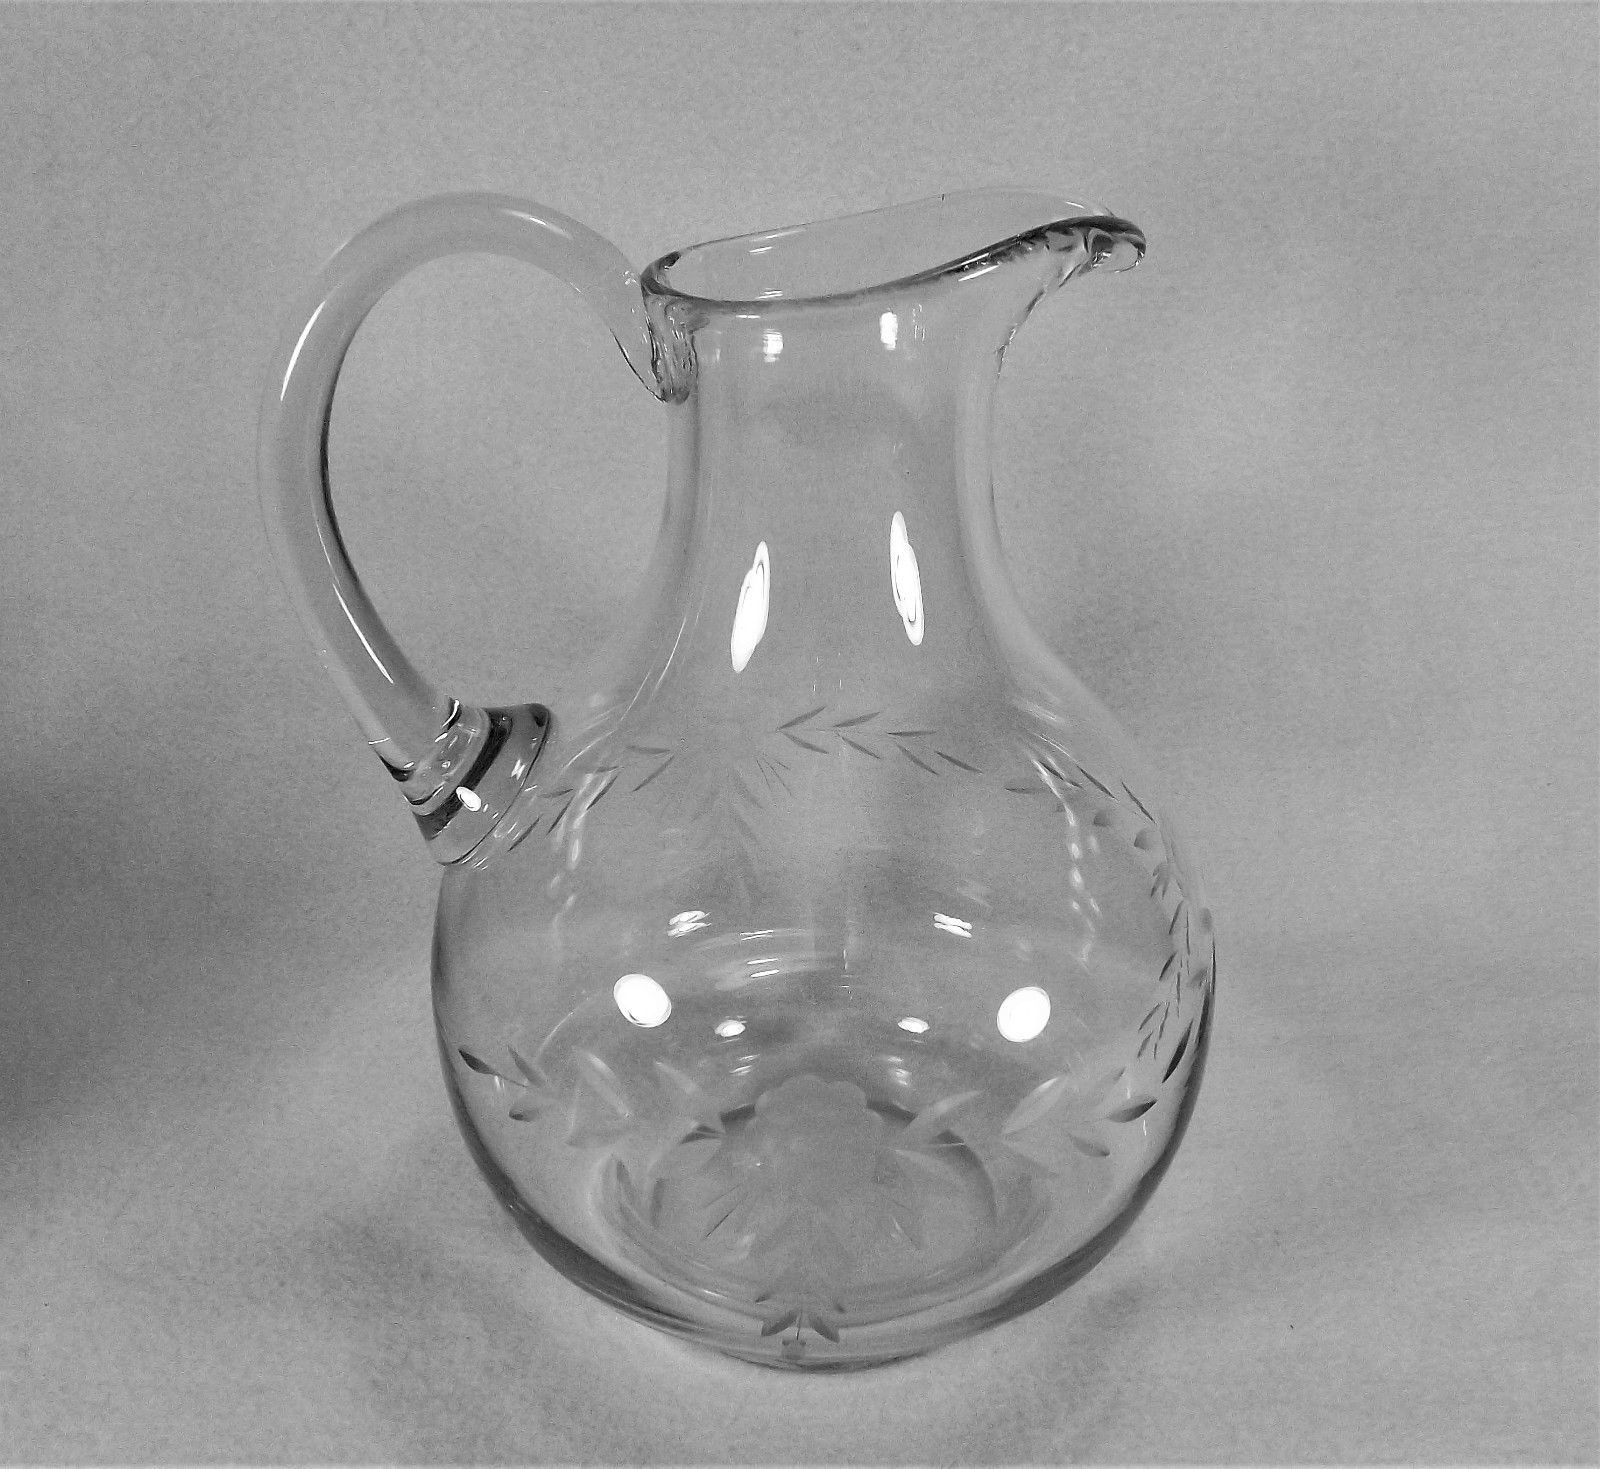 Vintage Clear Etched Butterflies & Leaves Pattern Glass Pitcher